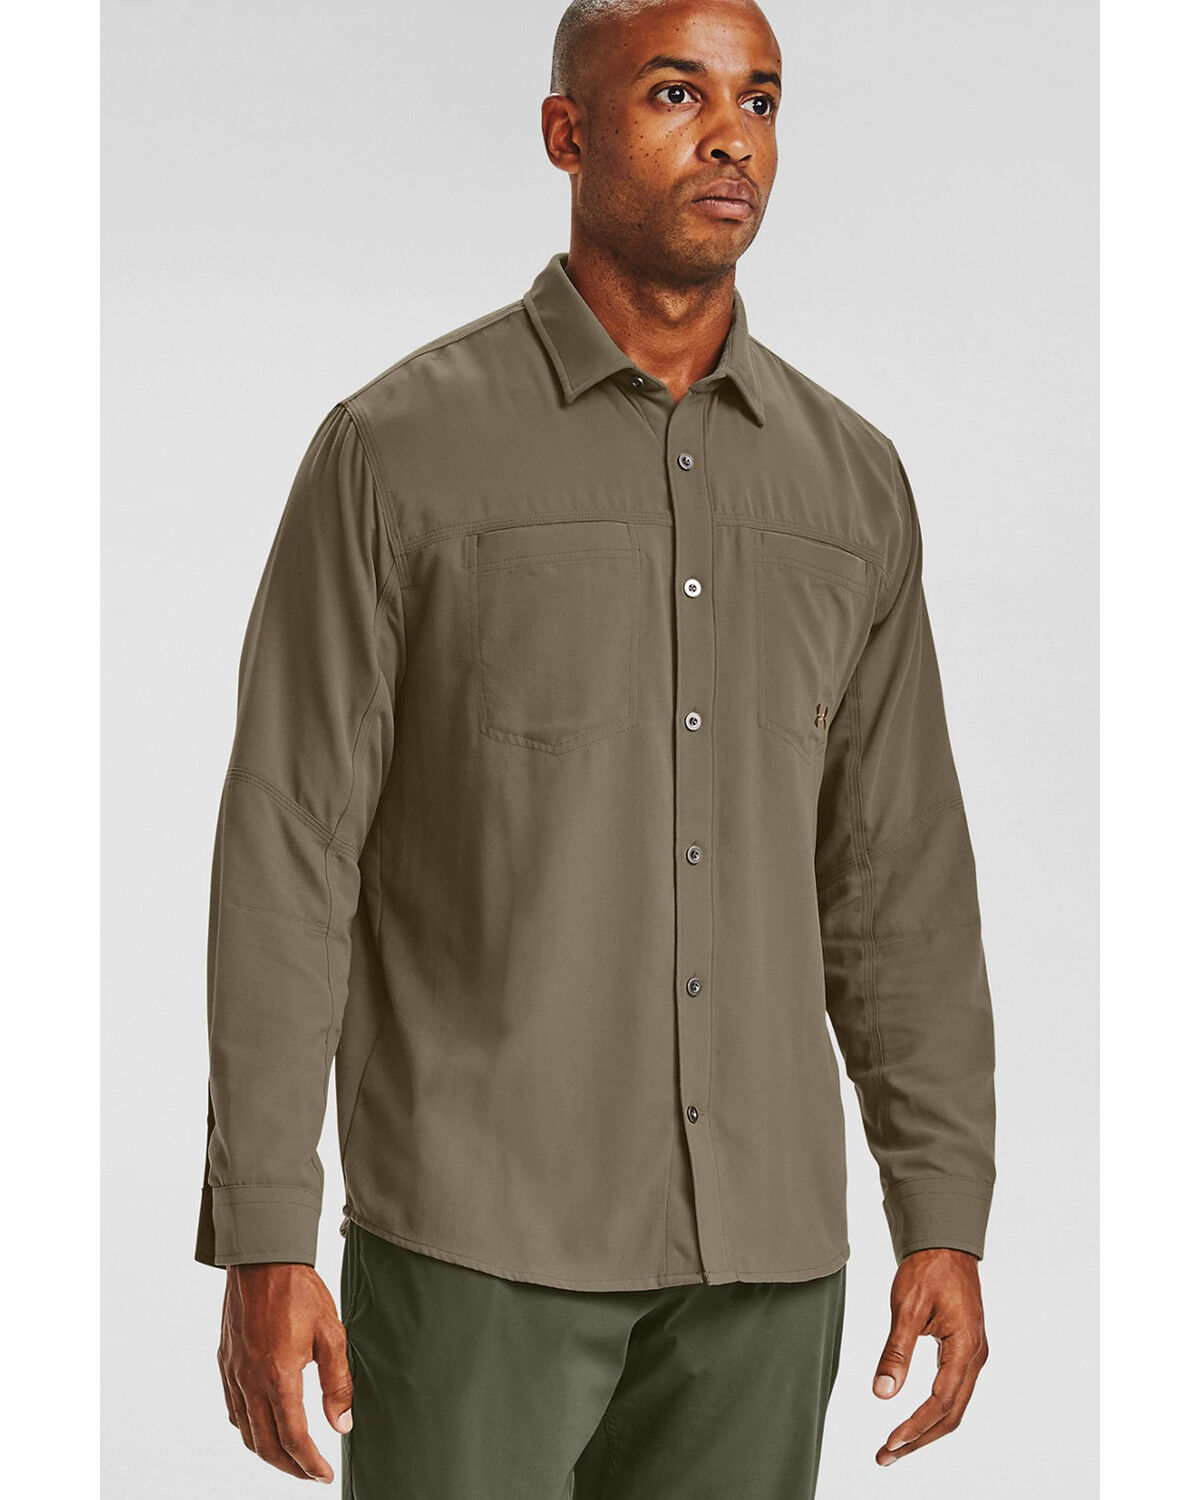 under armour long sleeve button down